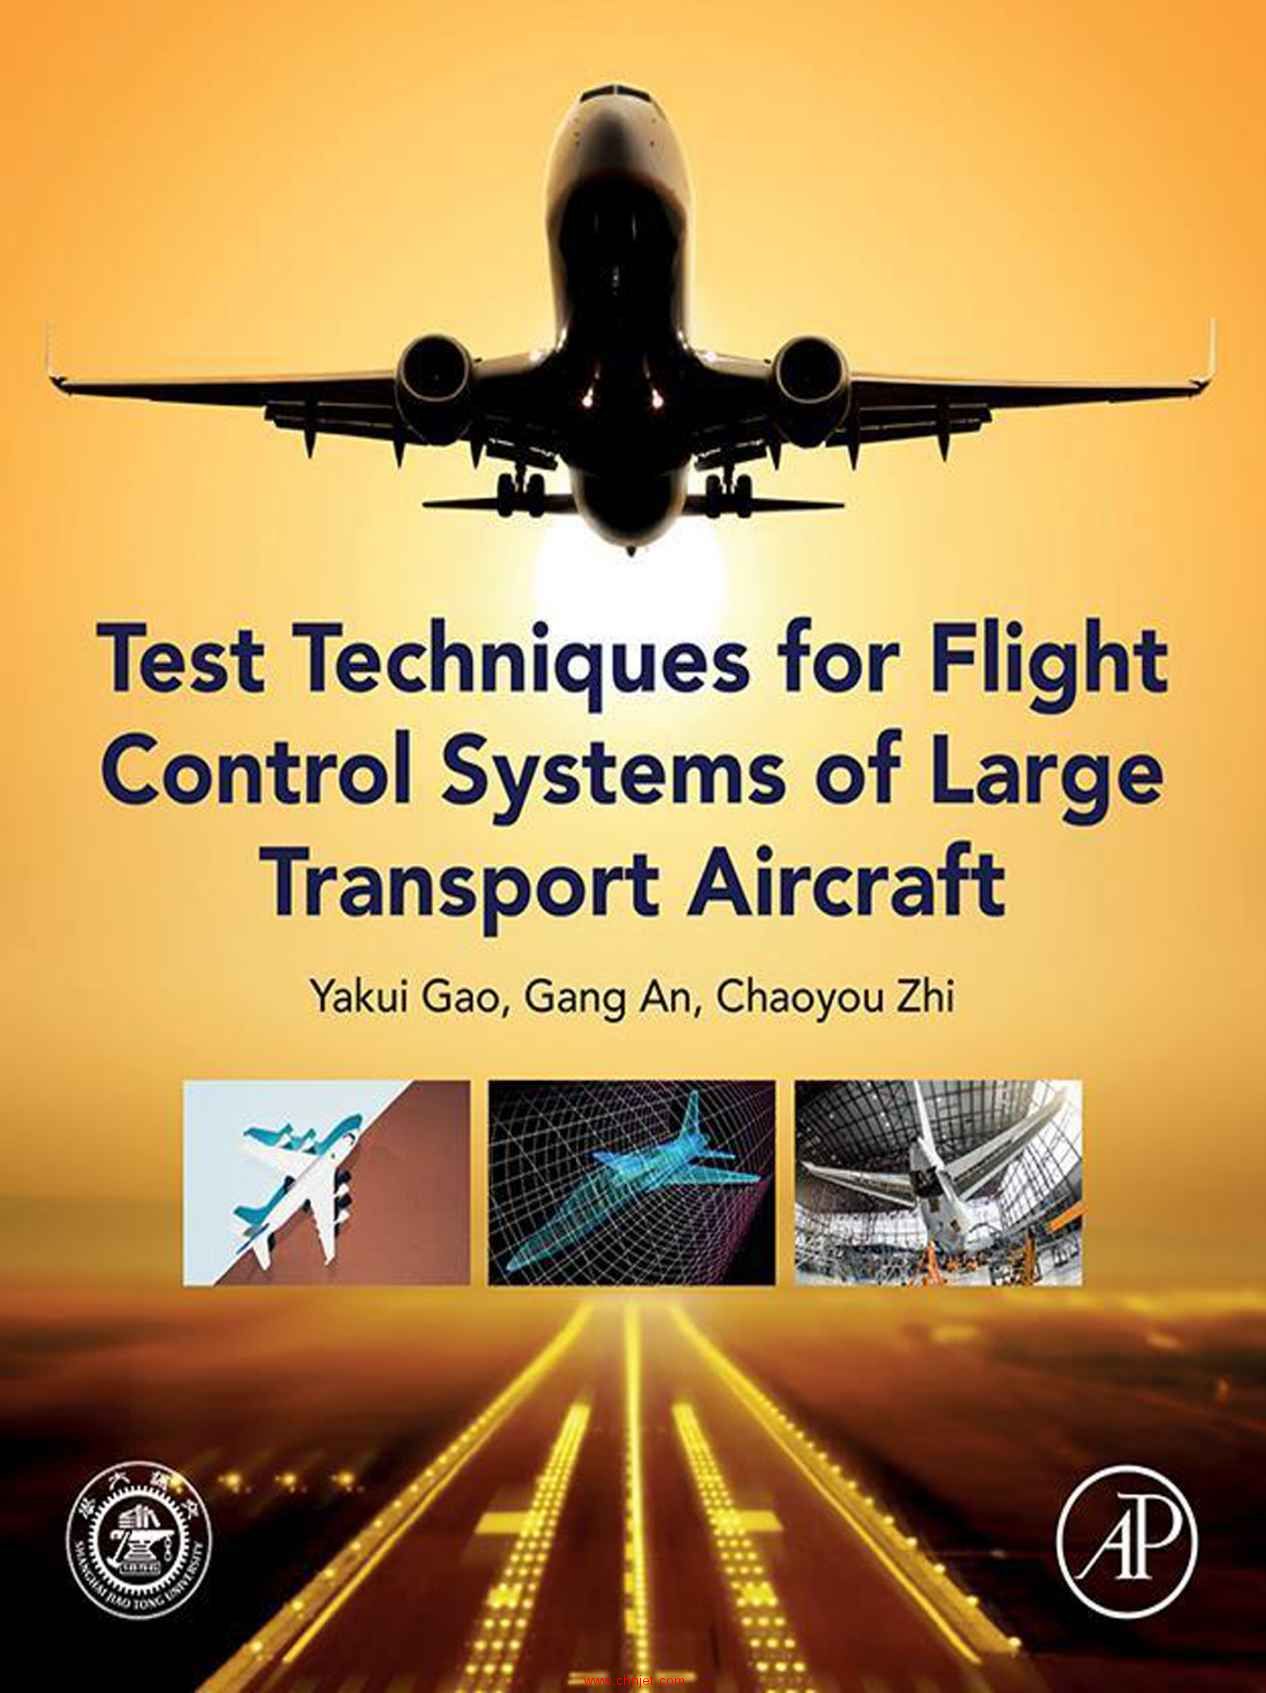 《Test Techniques for Flight Control Systems of Large Transport Aircraft》